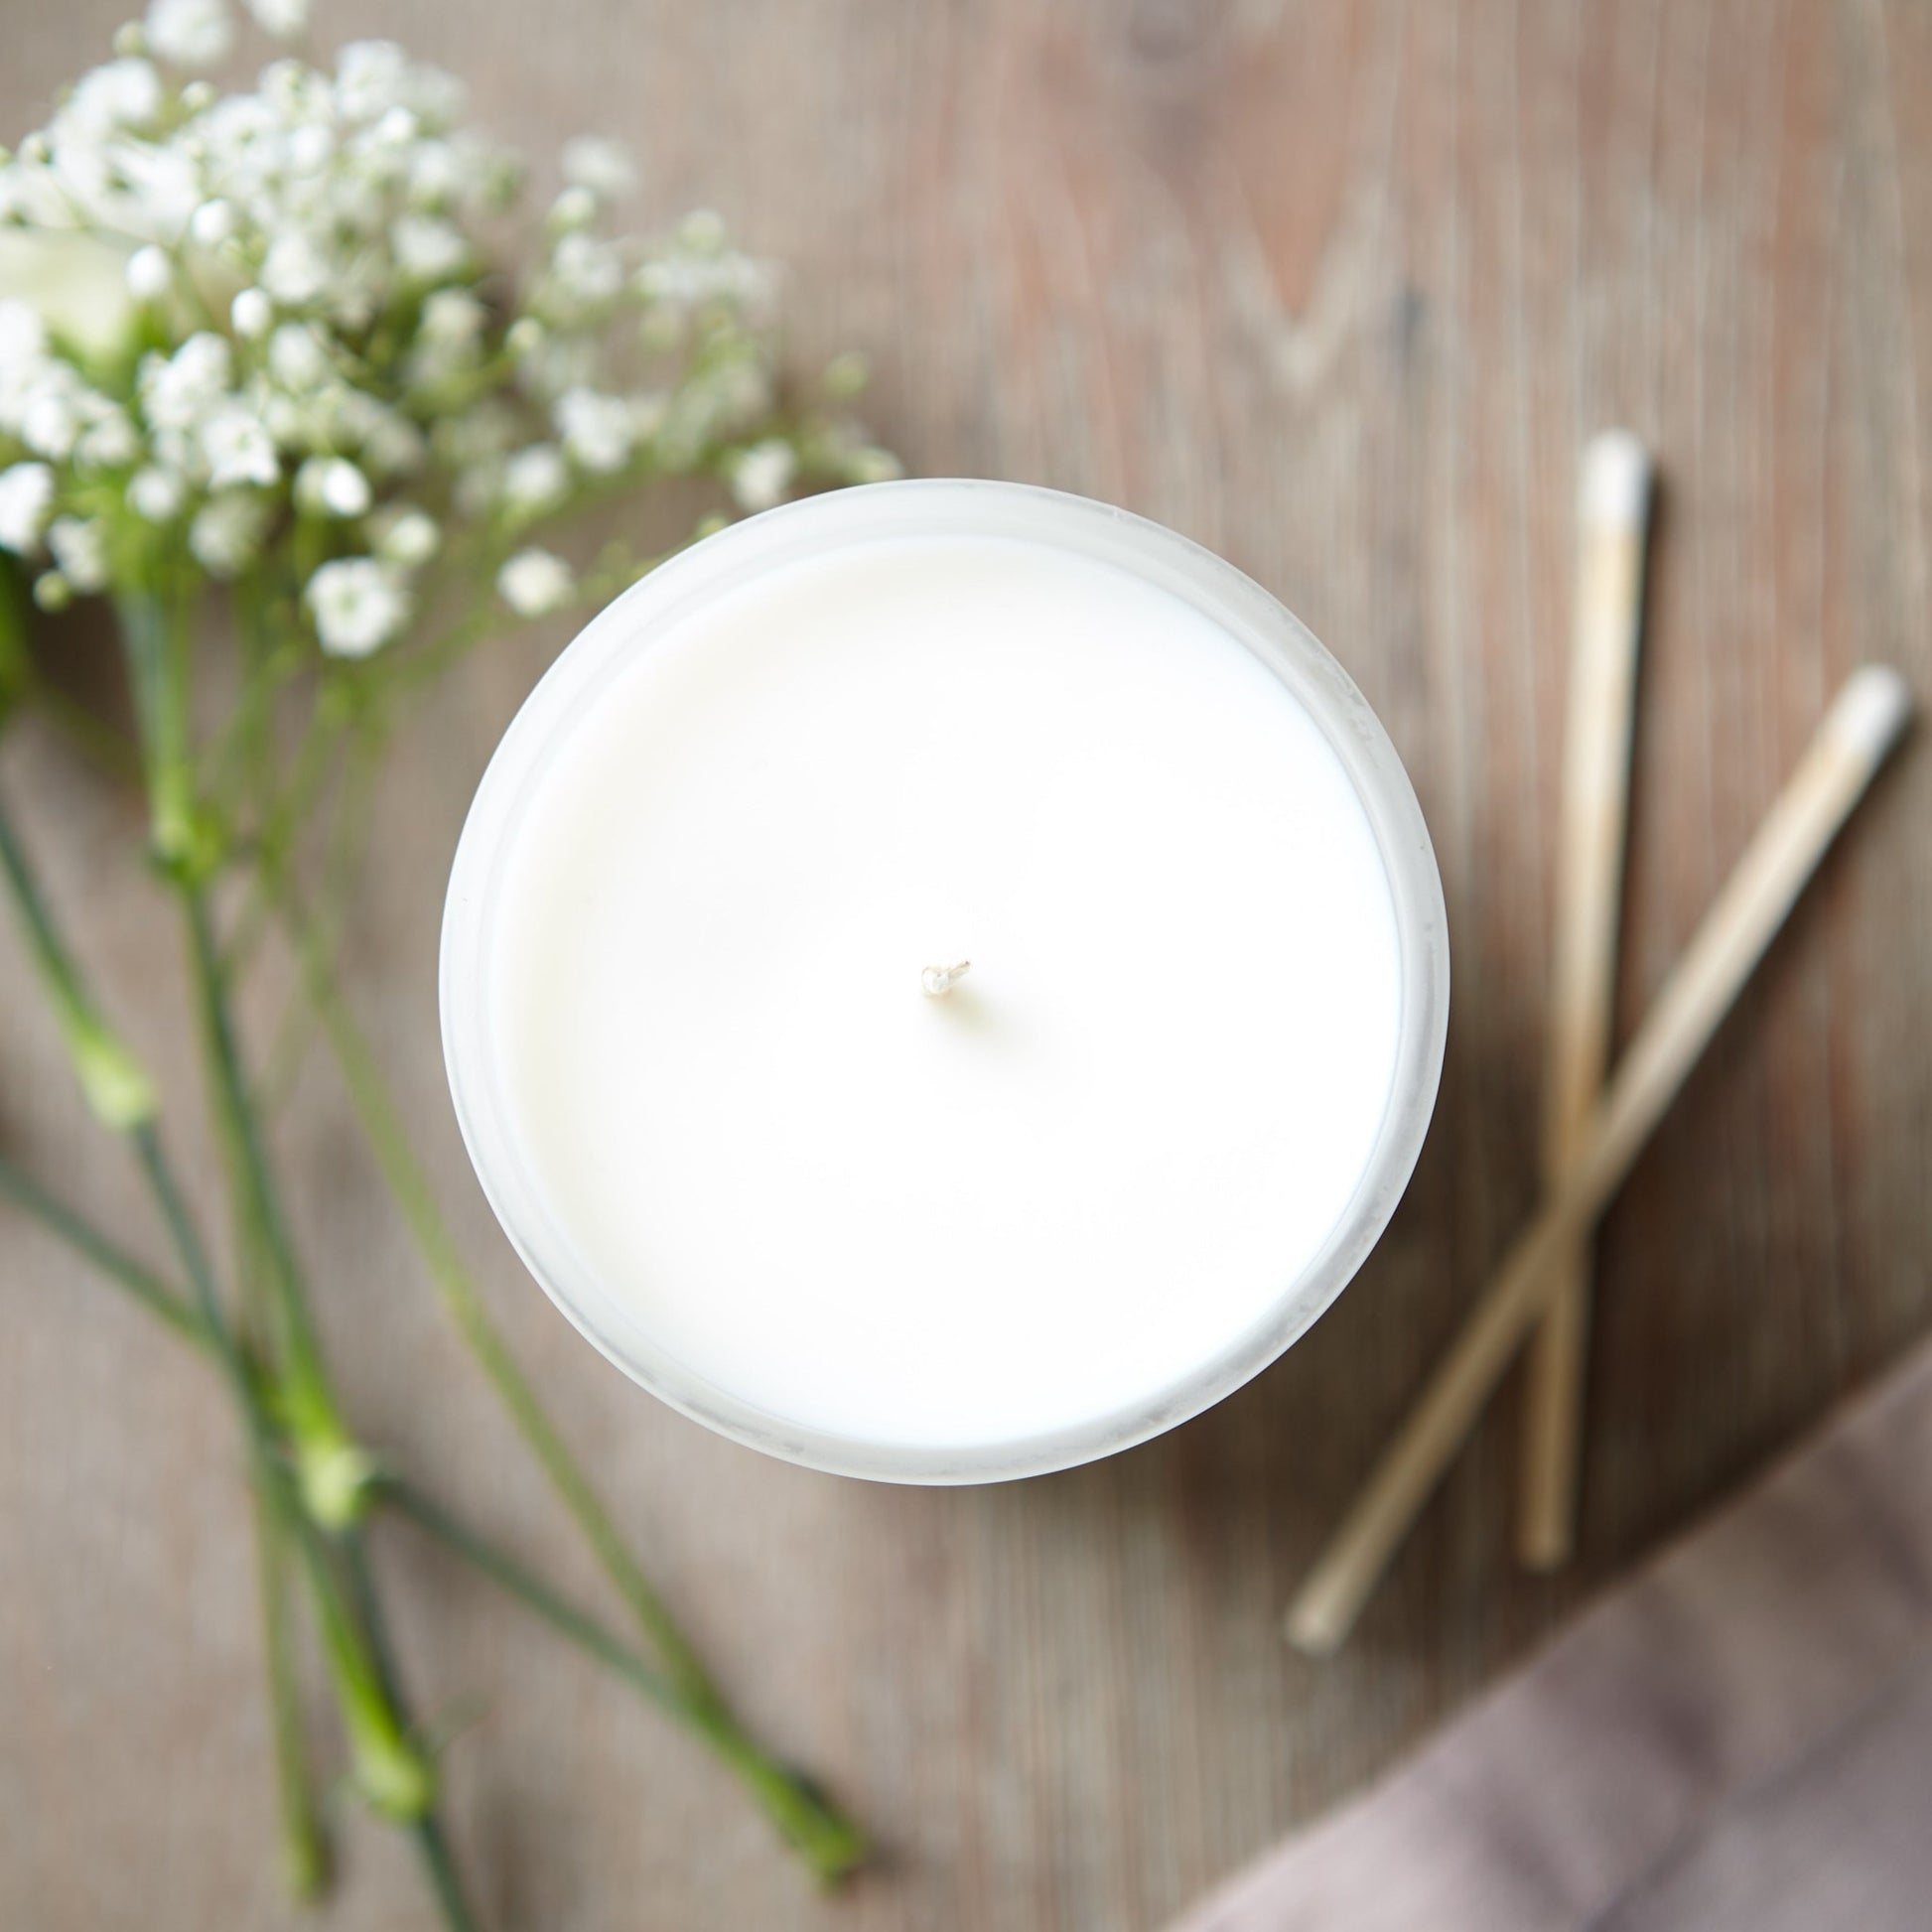 Mother's Day Gift Hero Candle - Kindred Fires